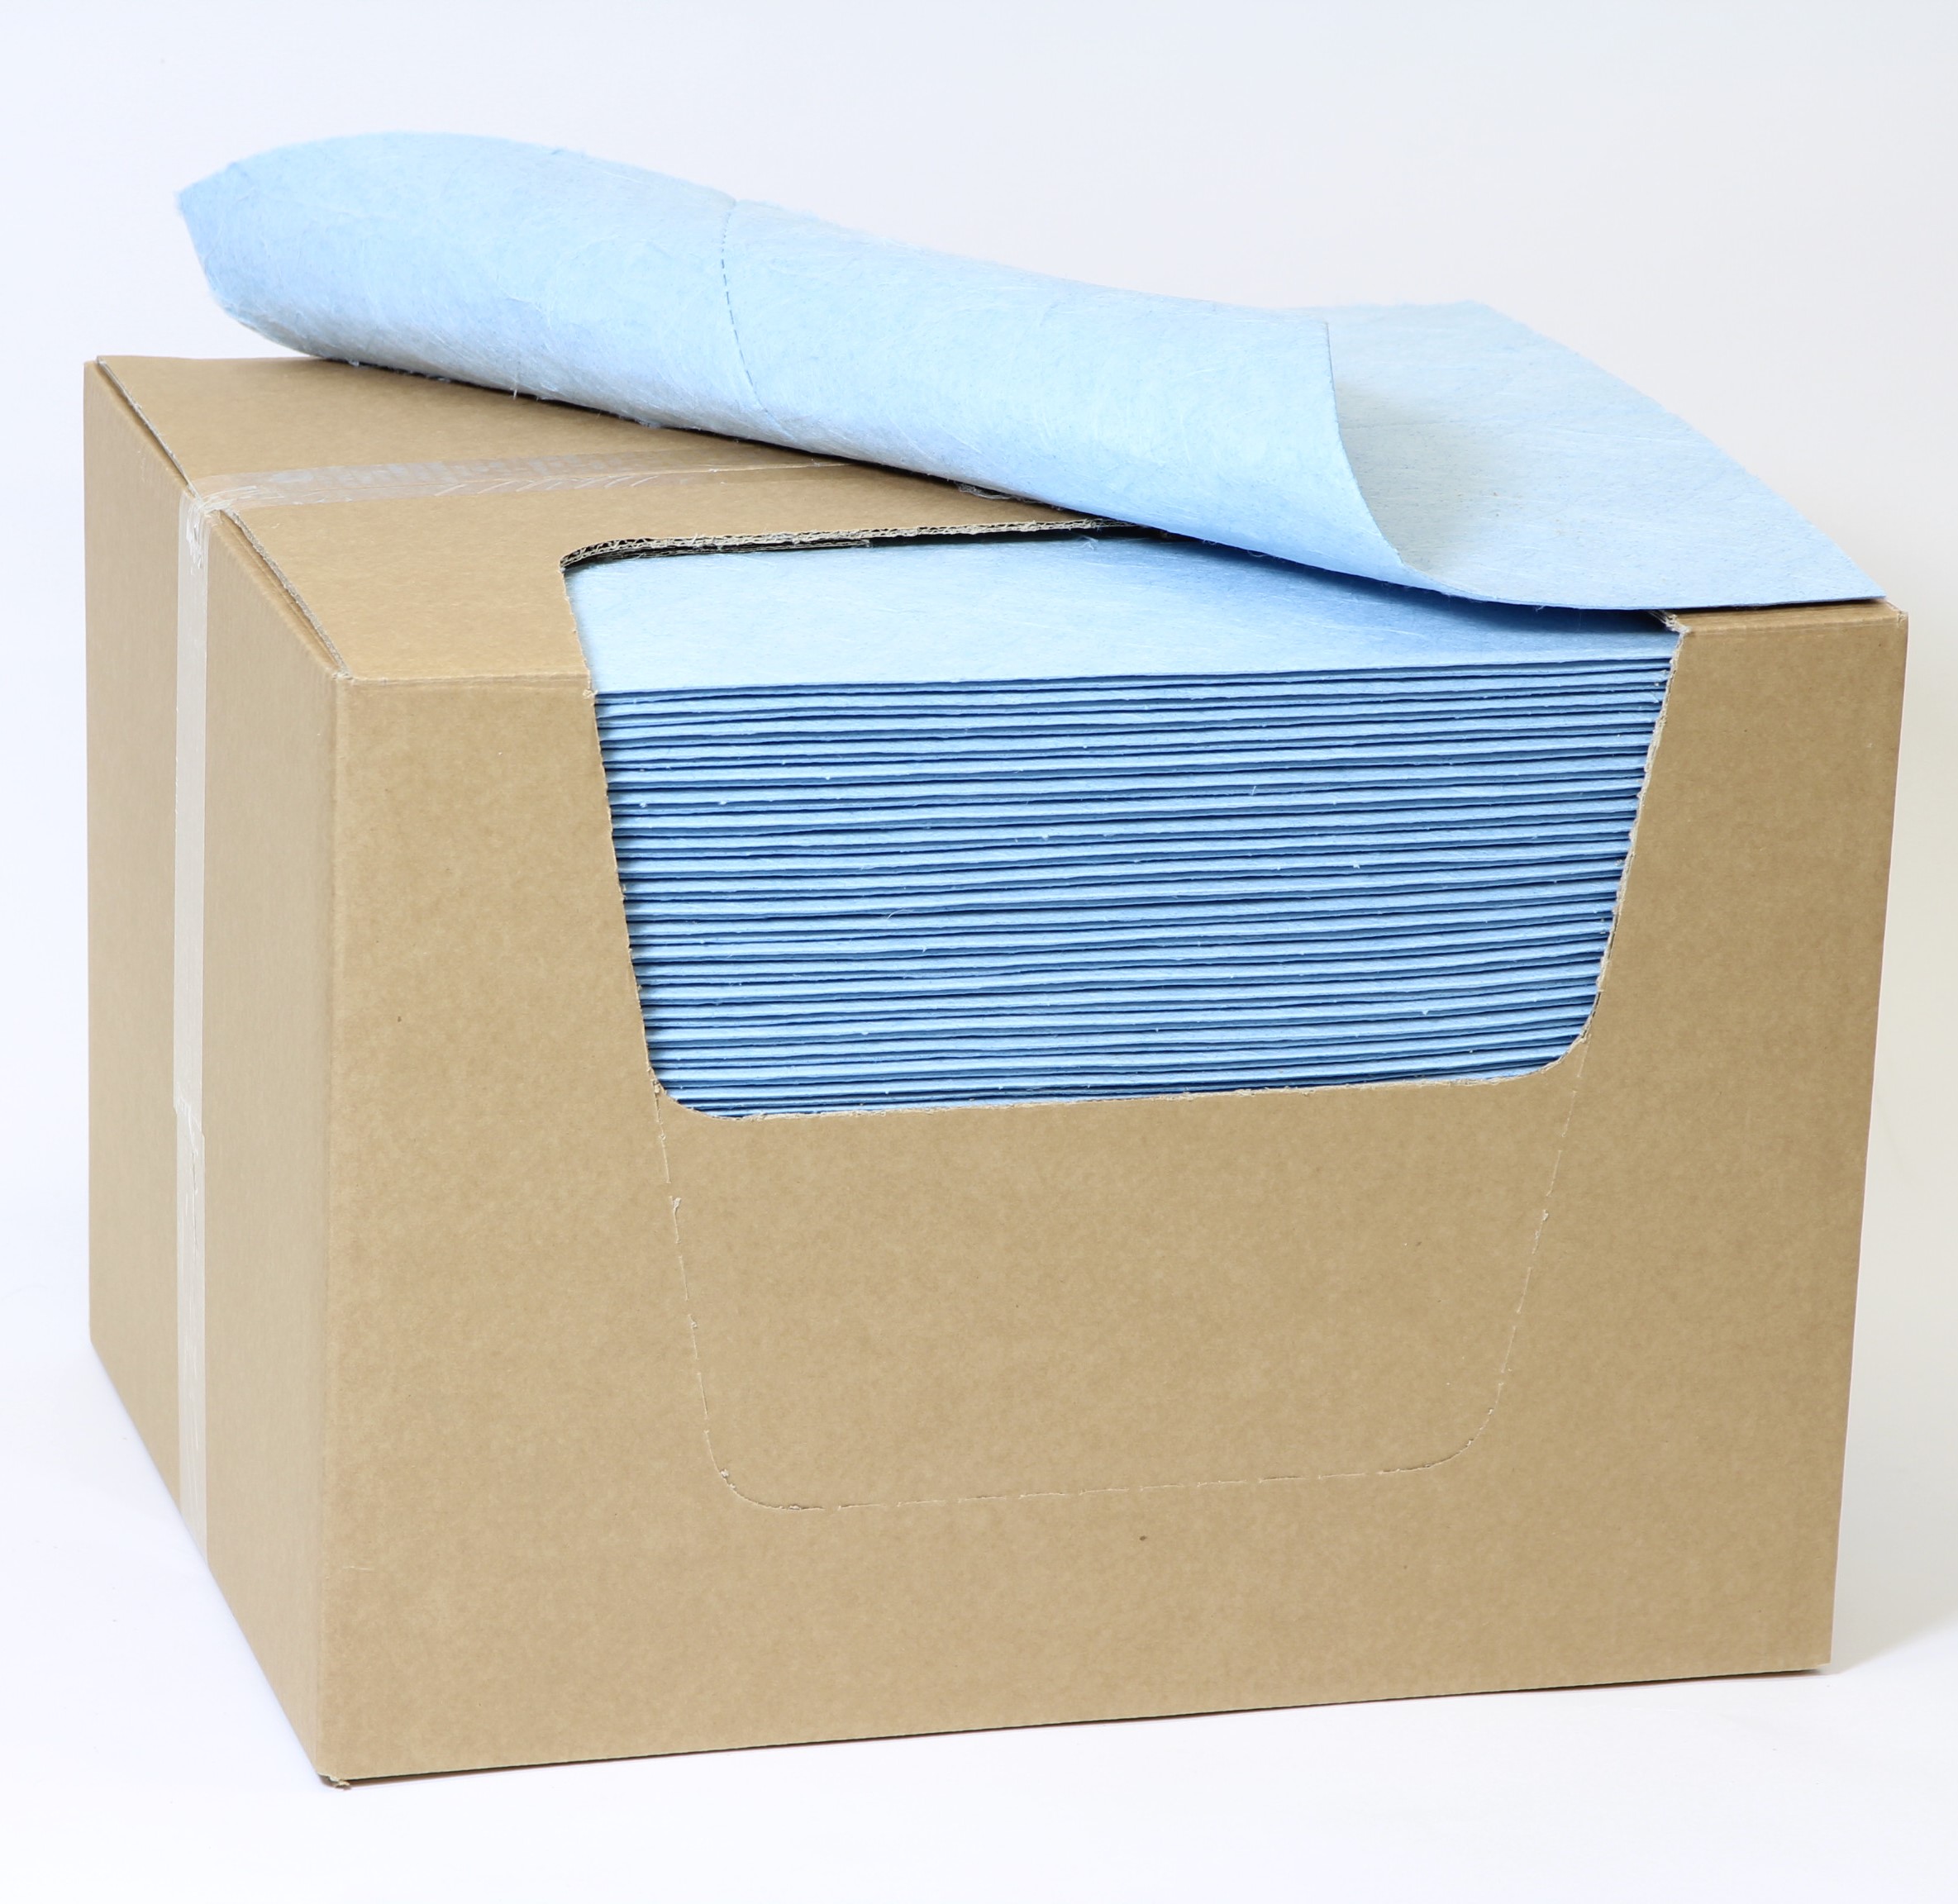 ICOSORB&#174; FIRST LIGHT blue in a box